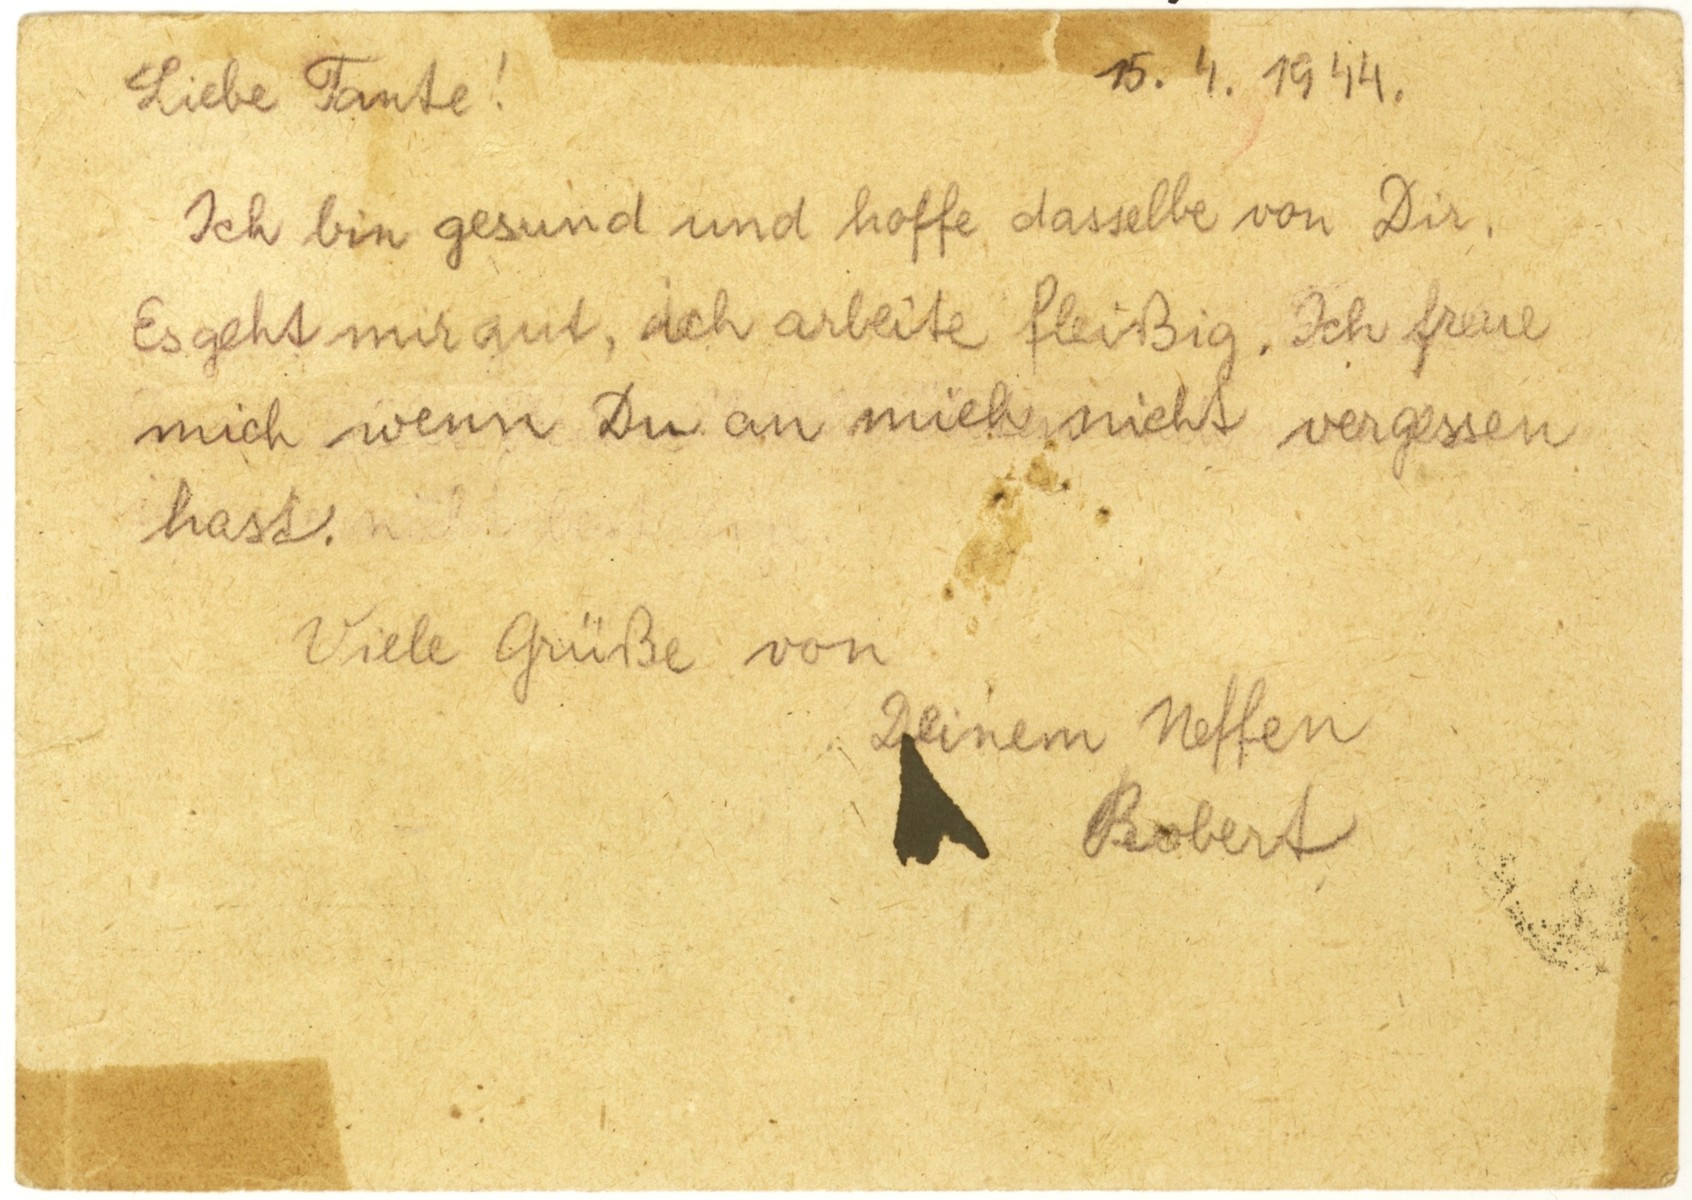 A postcard sent to Anna (Goldstein) Hajsky, by her nephew, Robert Silberstern, from the Auschwitz-Birkenau concentration camp.  

Robert writes that he is healthy and working hard.  He hopes that his aunt has not forgotten him.  By this time, however, Anna, had already been deported to the Theresienstadt concentration camp.  The postcard was received by Anna's sons, Marcel and Jan, who escaped deportation because their father, Cenek Hajsky, was not Jewish.